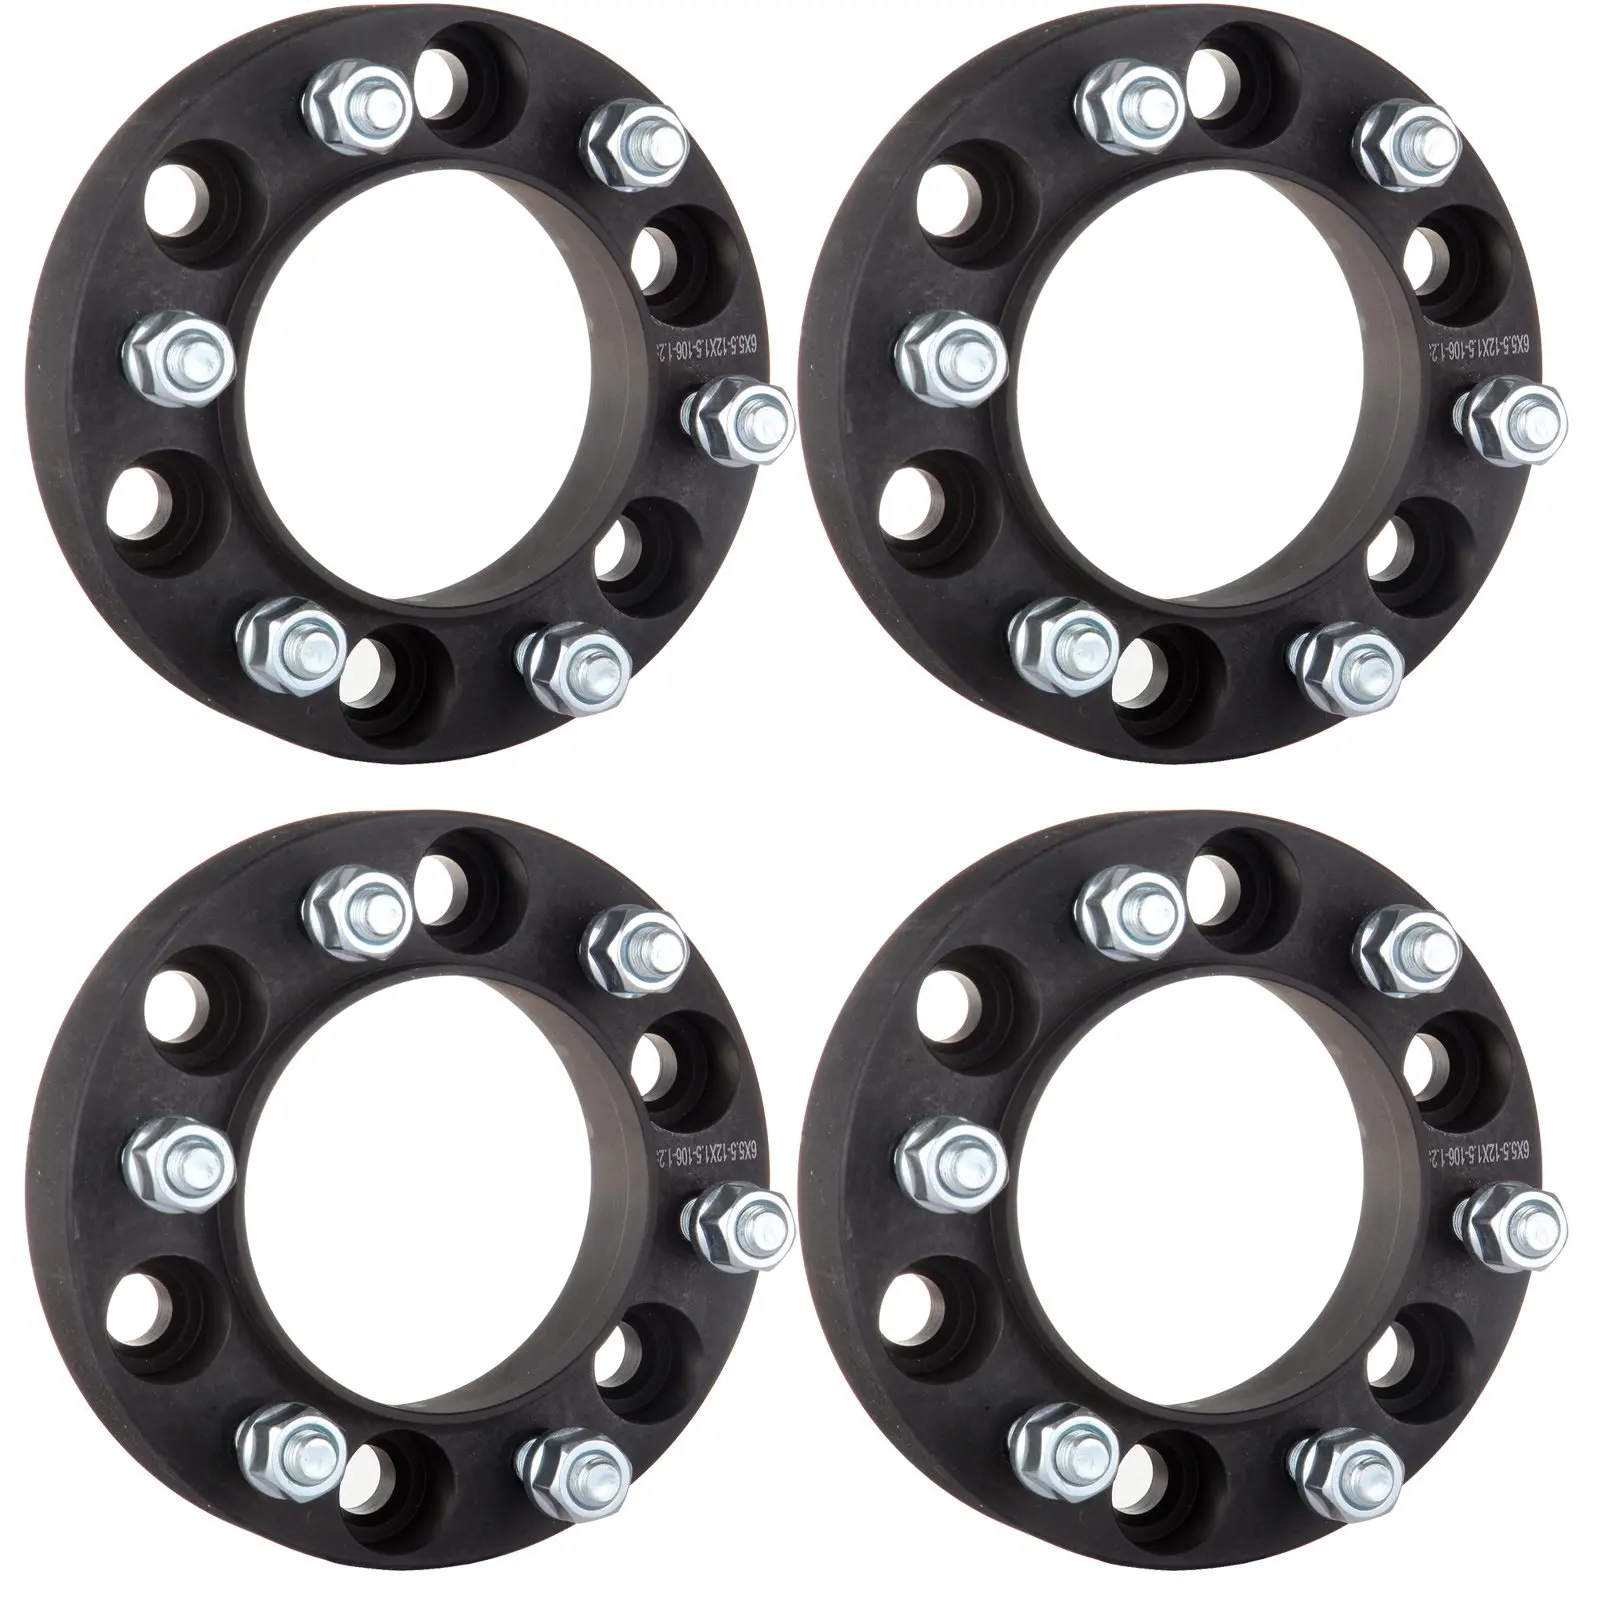 Cheap Toyota Tundra Wheel Spacer, find Toyota Tundra Wheel Spacer deals